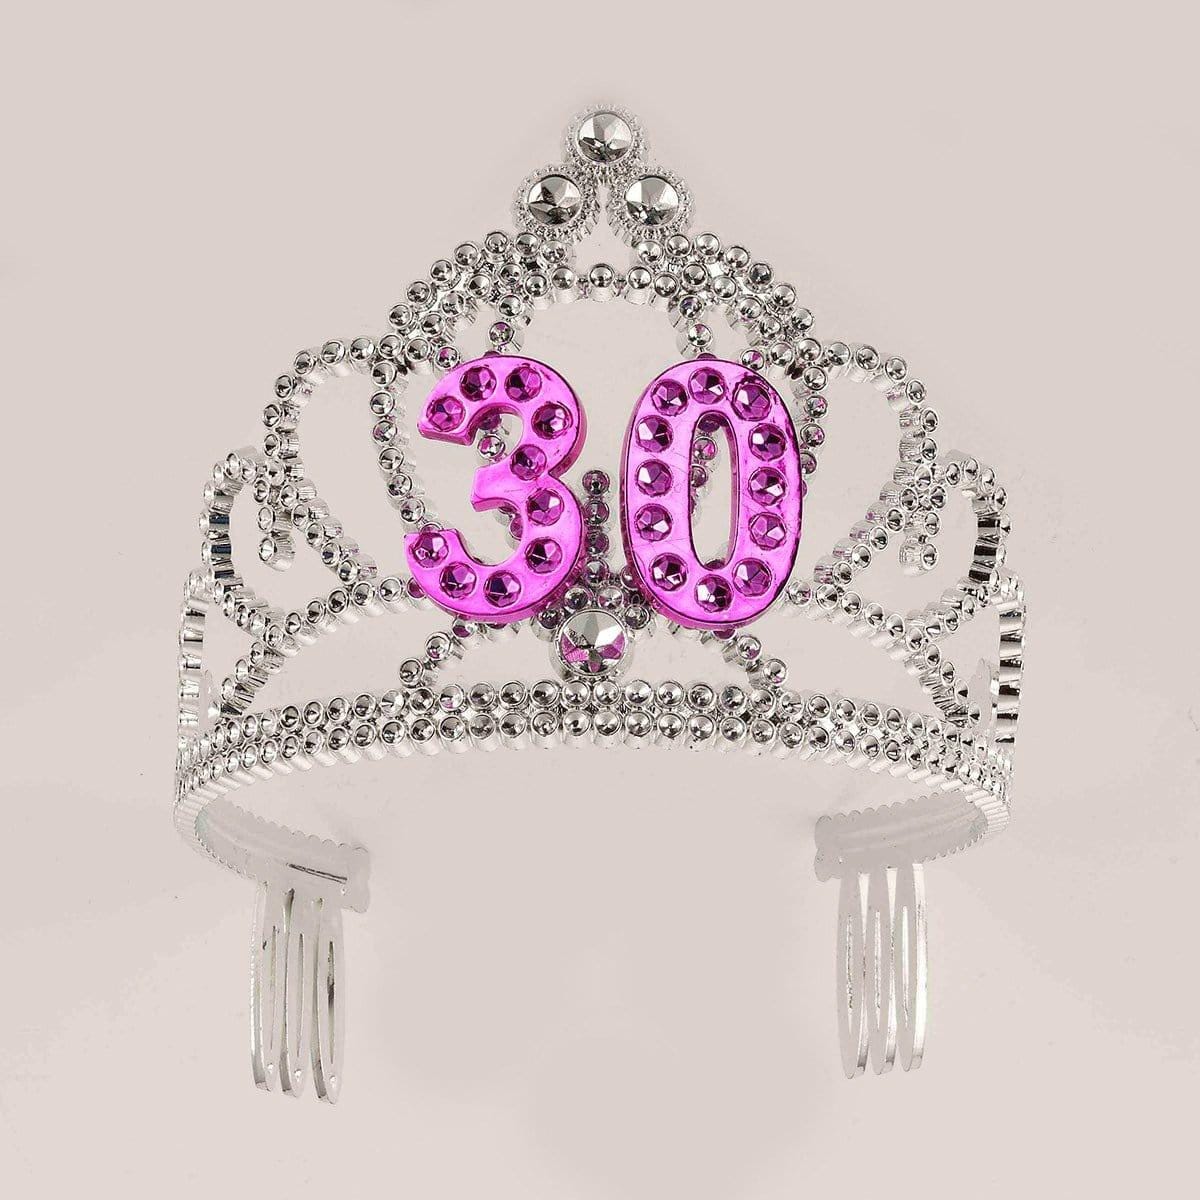 Buy Age Specific Birthday Plastic Tiara 30th sold at Party Expert